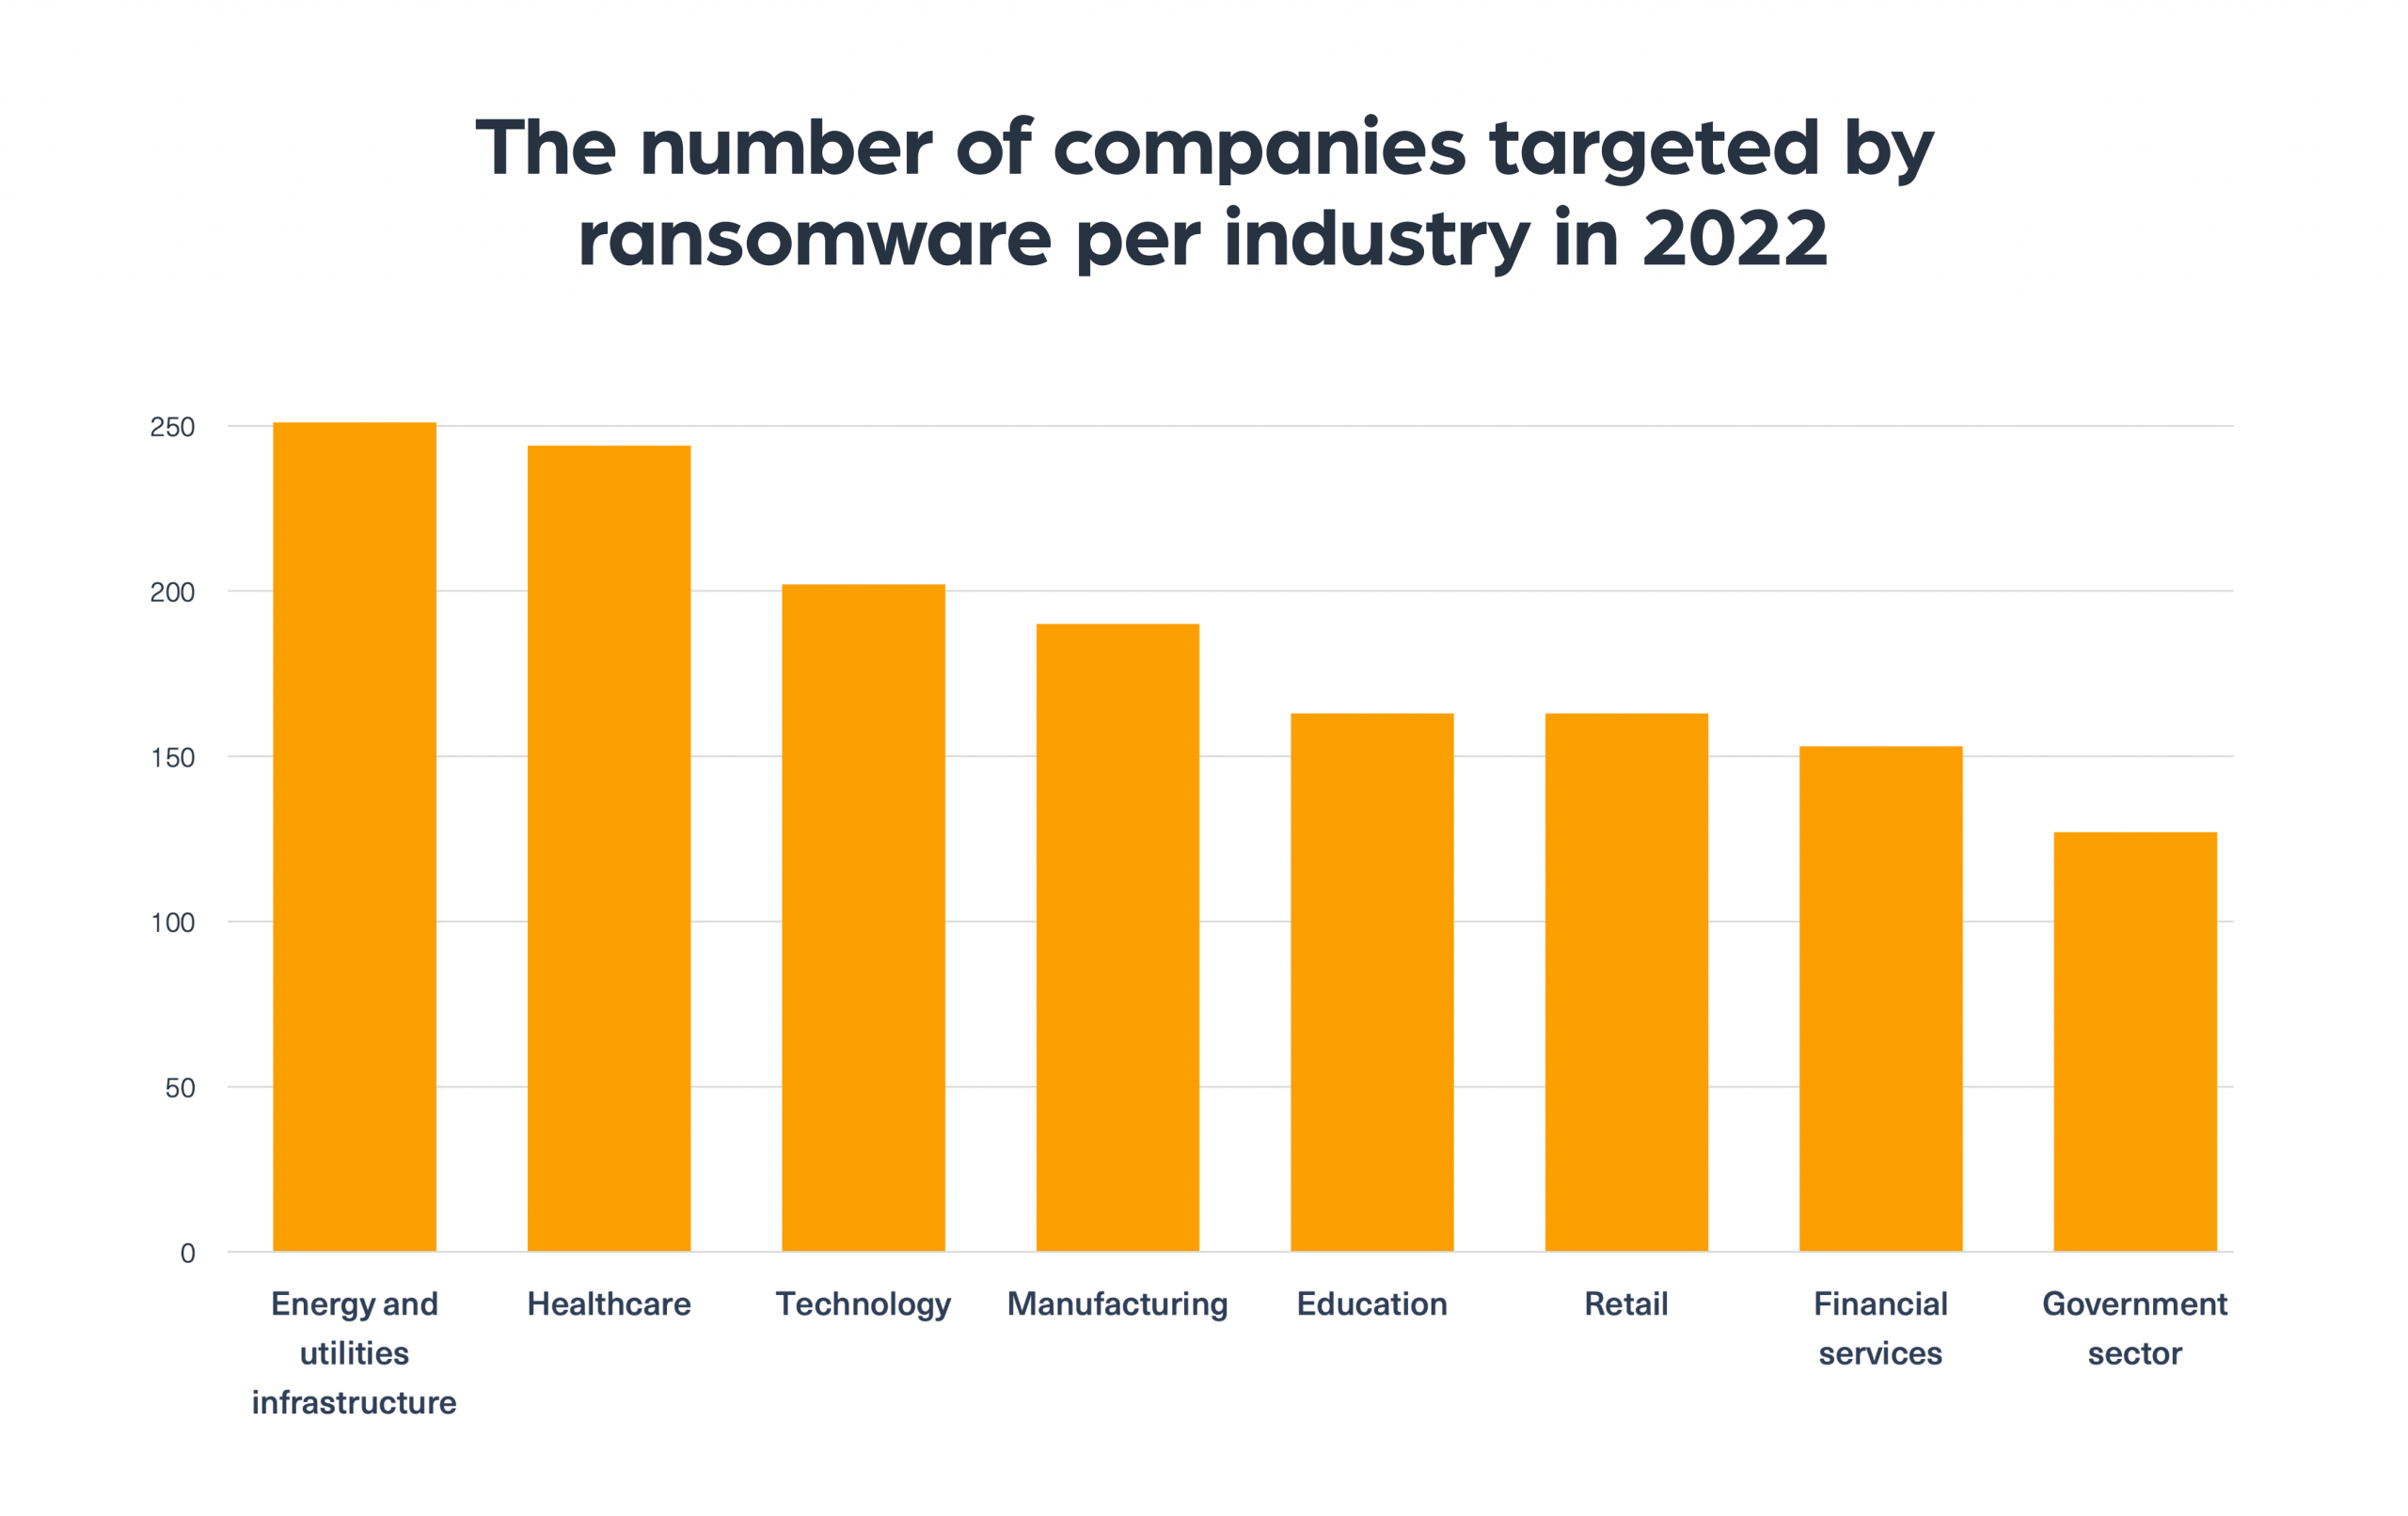 The number of companies targeted by ransomware per industry in 2022